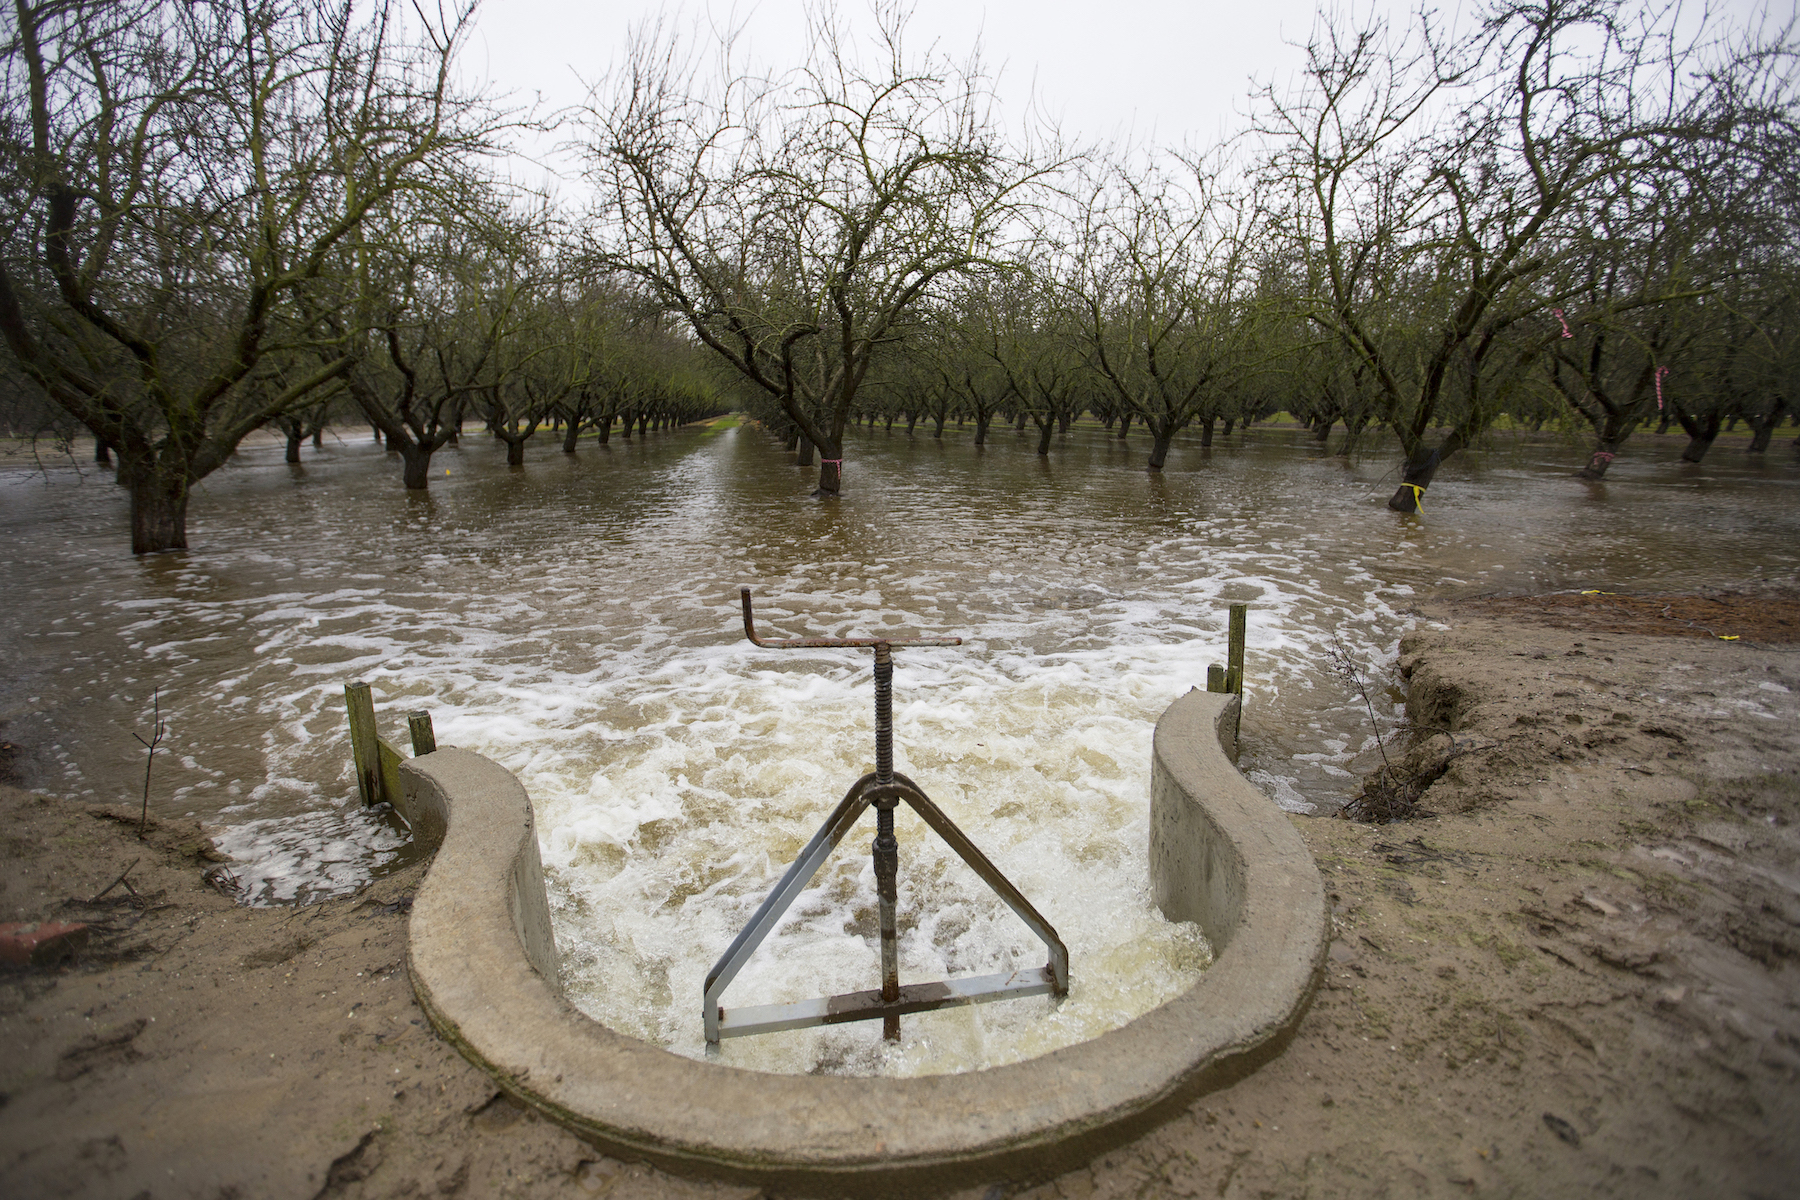 Diverted water spills into an almond orchard in Modesto, CA in November of 2016 to help recharge the aquifer beneath the field. UC Davis scientists are studying managed aquifer recharge as a solution to California's groundwater overpumping. (Curtis Jerome Haynes)